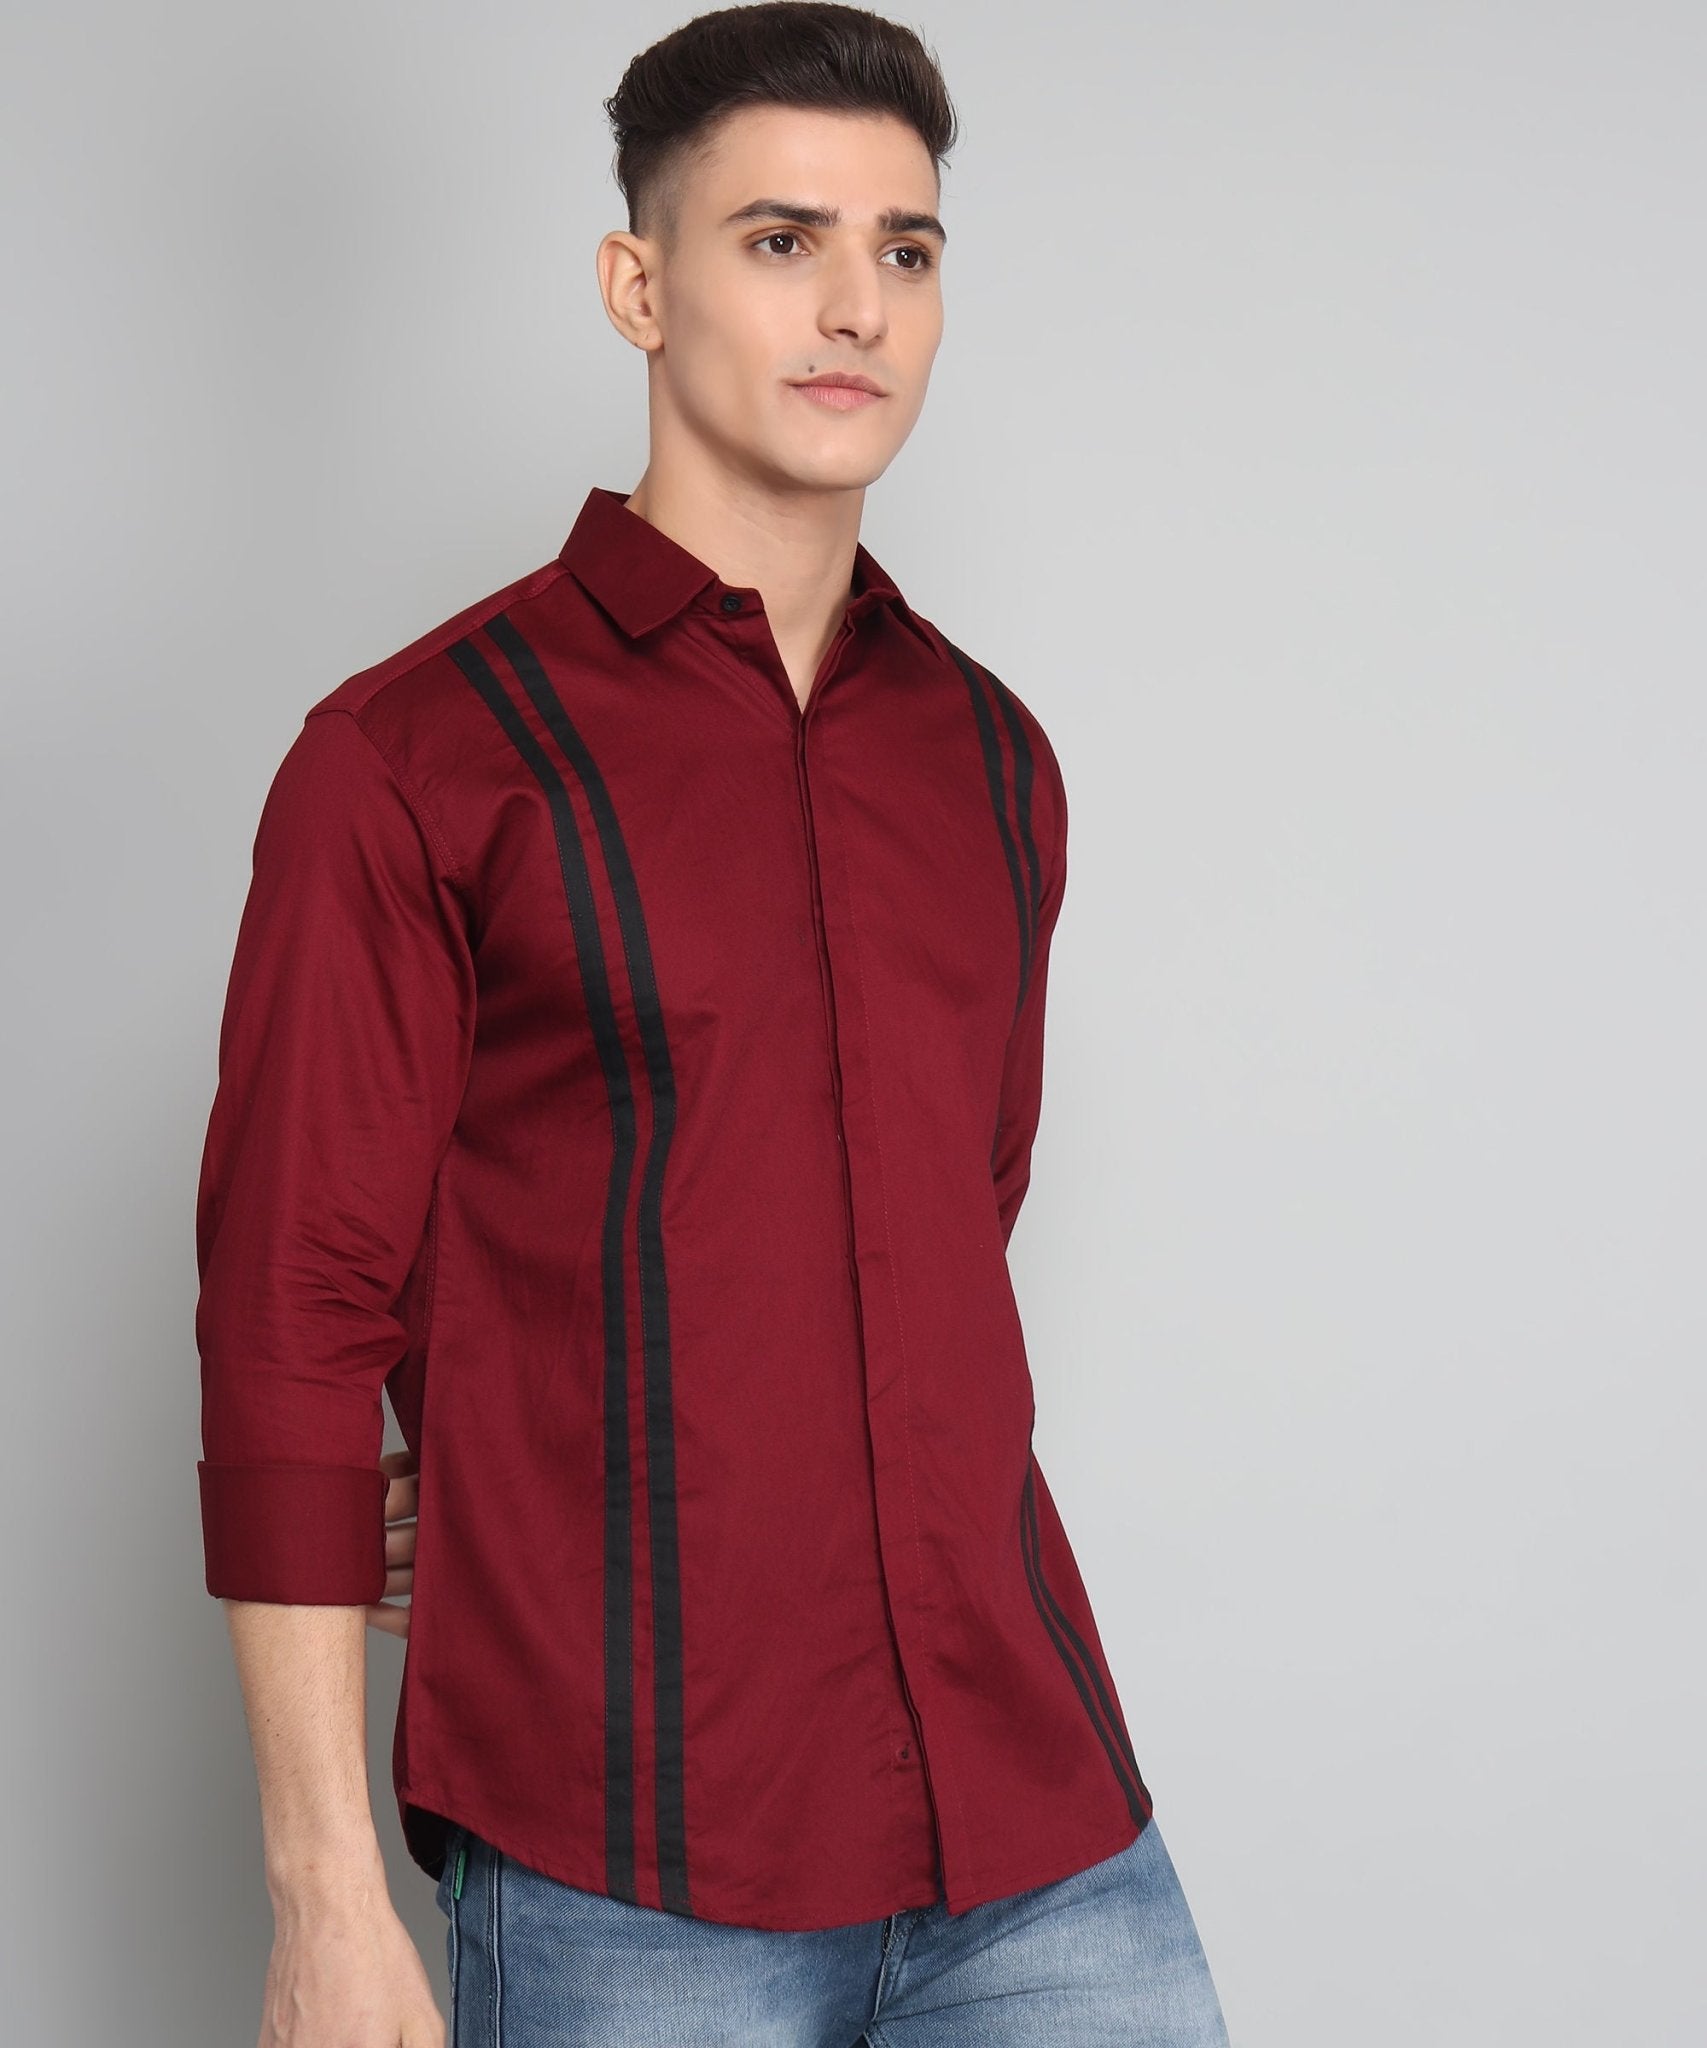 TryBuy Premium Maroon Colored Black Striped Cotton Casual Shirt for Men - TryBuy® USA🇺🇸